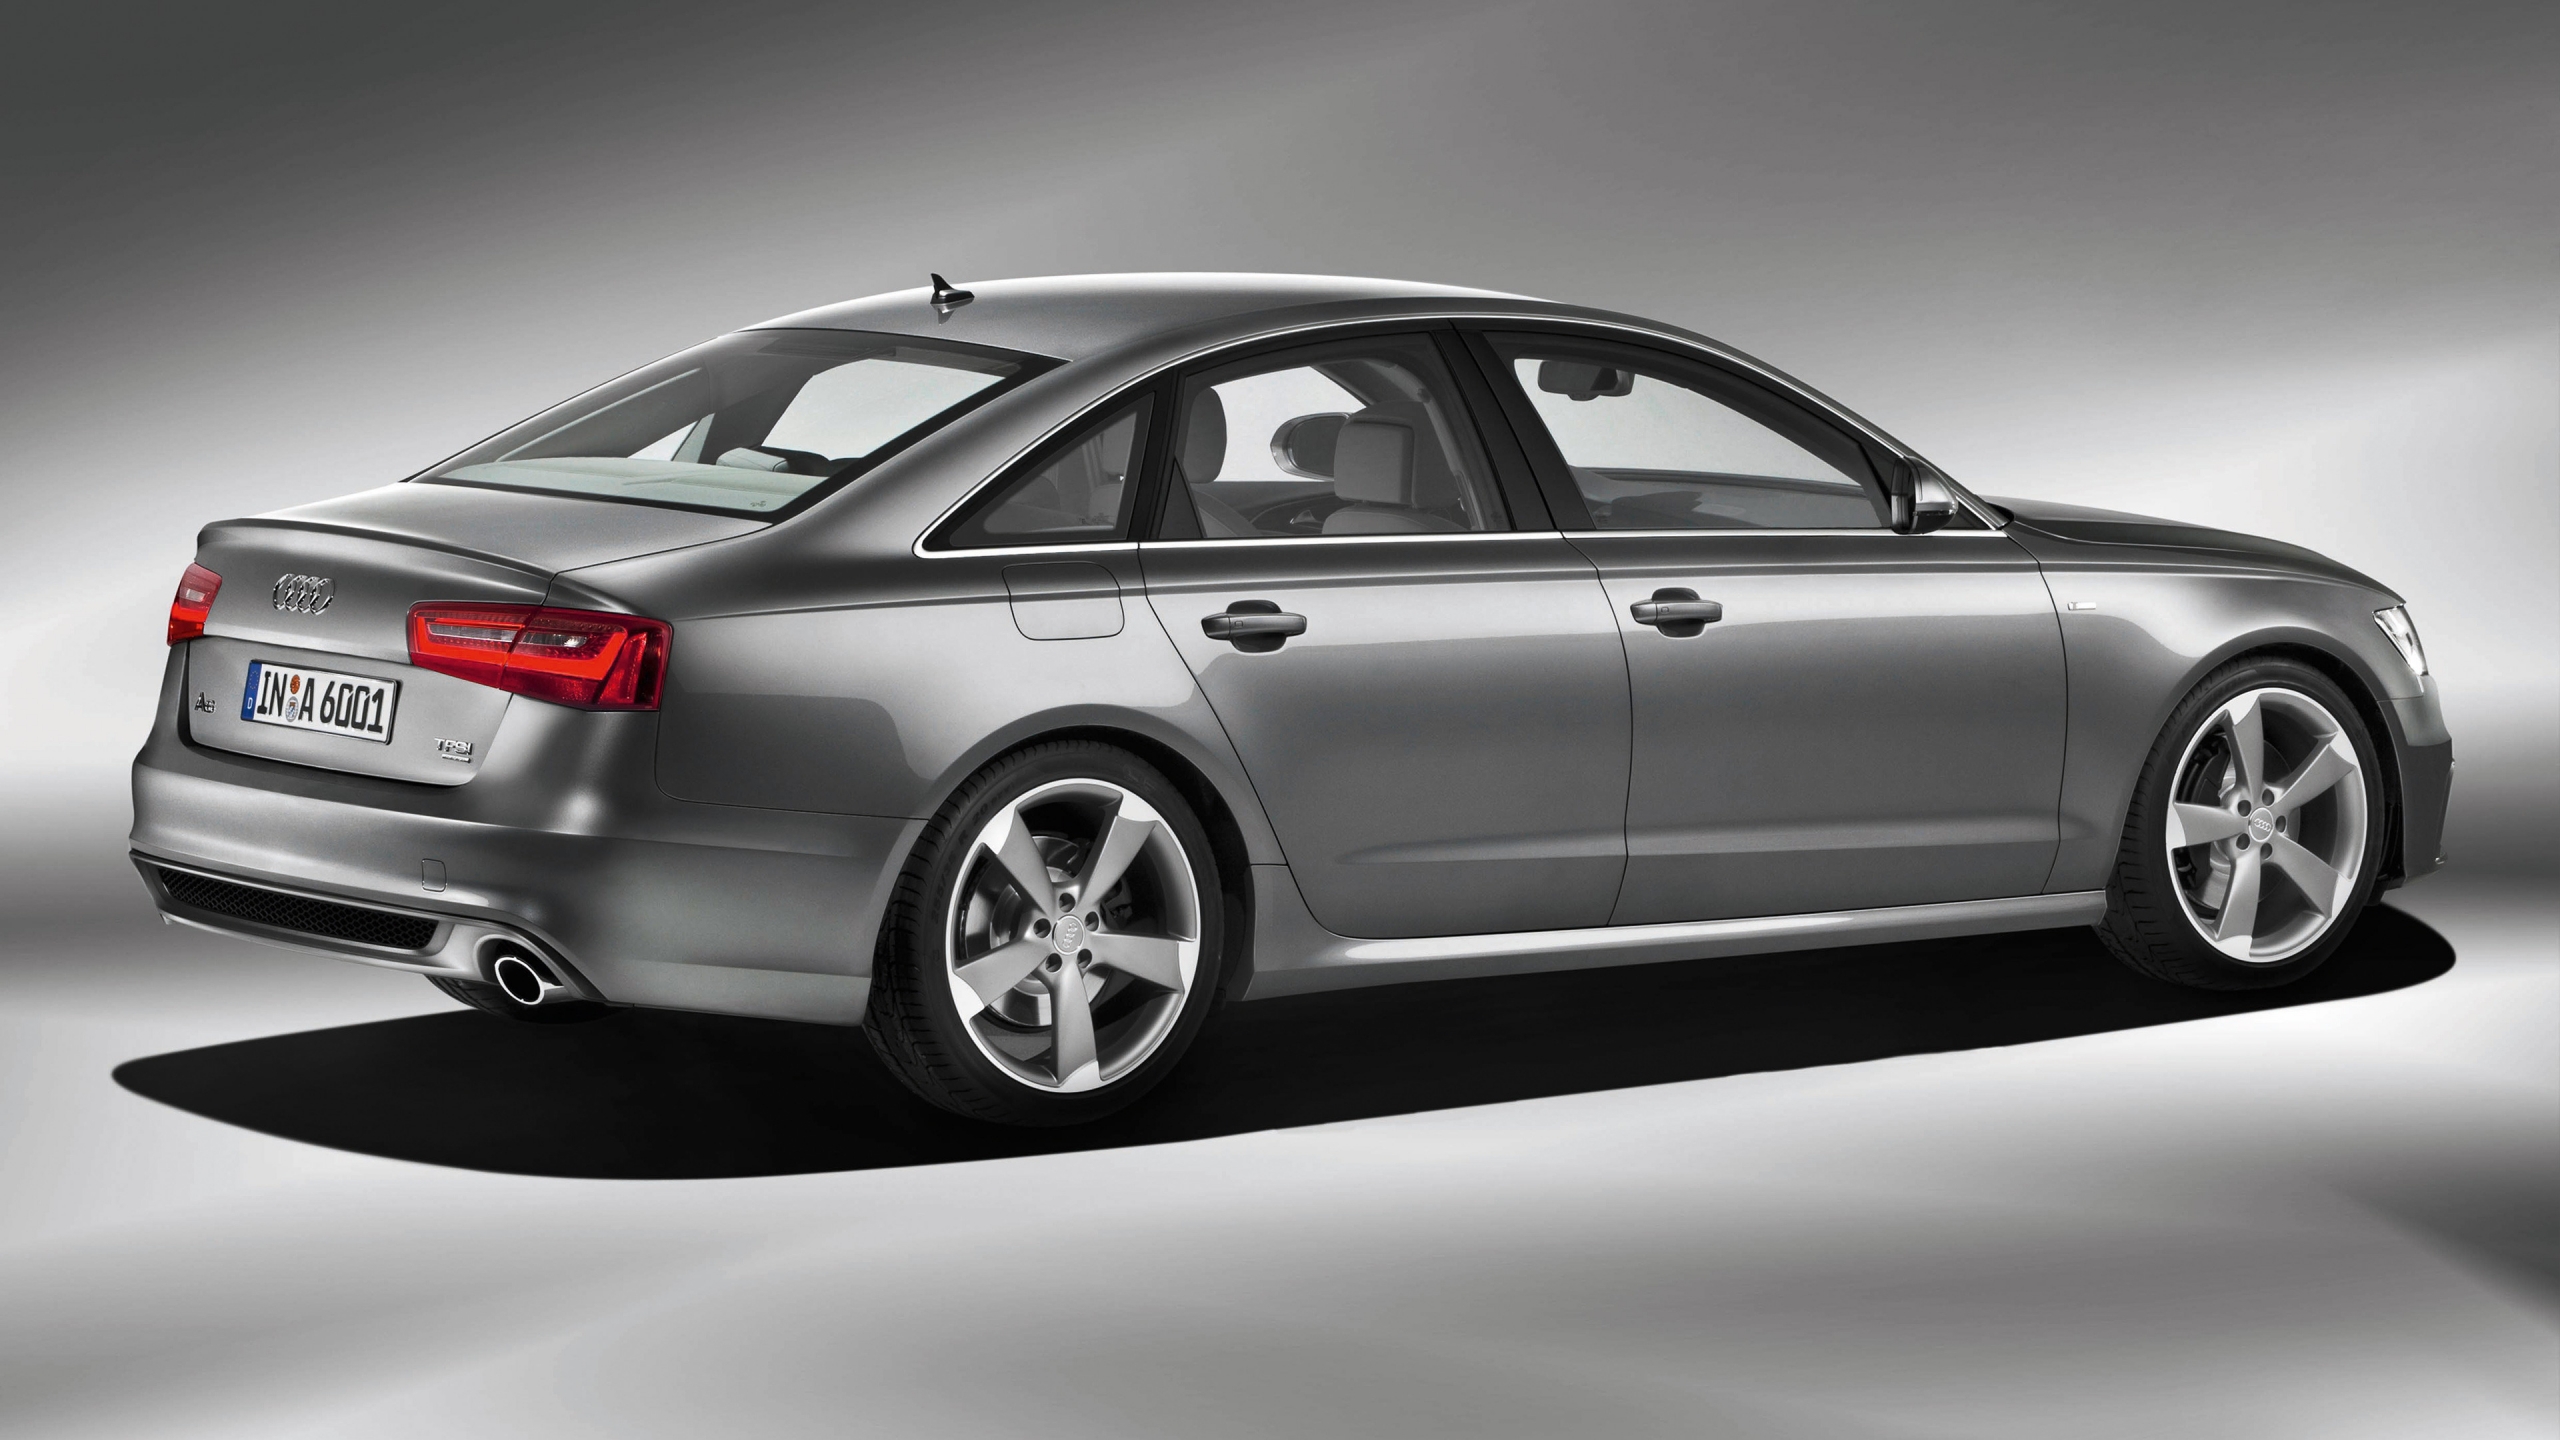 Audi A6 2012 for 2560x1440 HDTV resolution